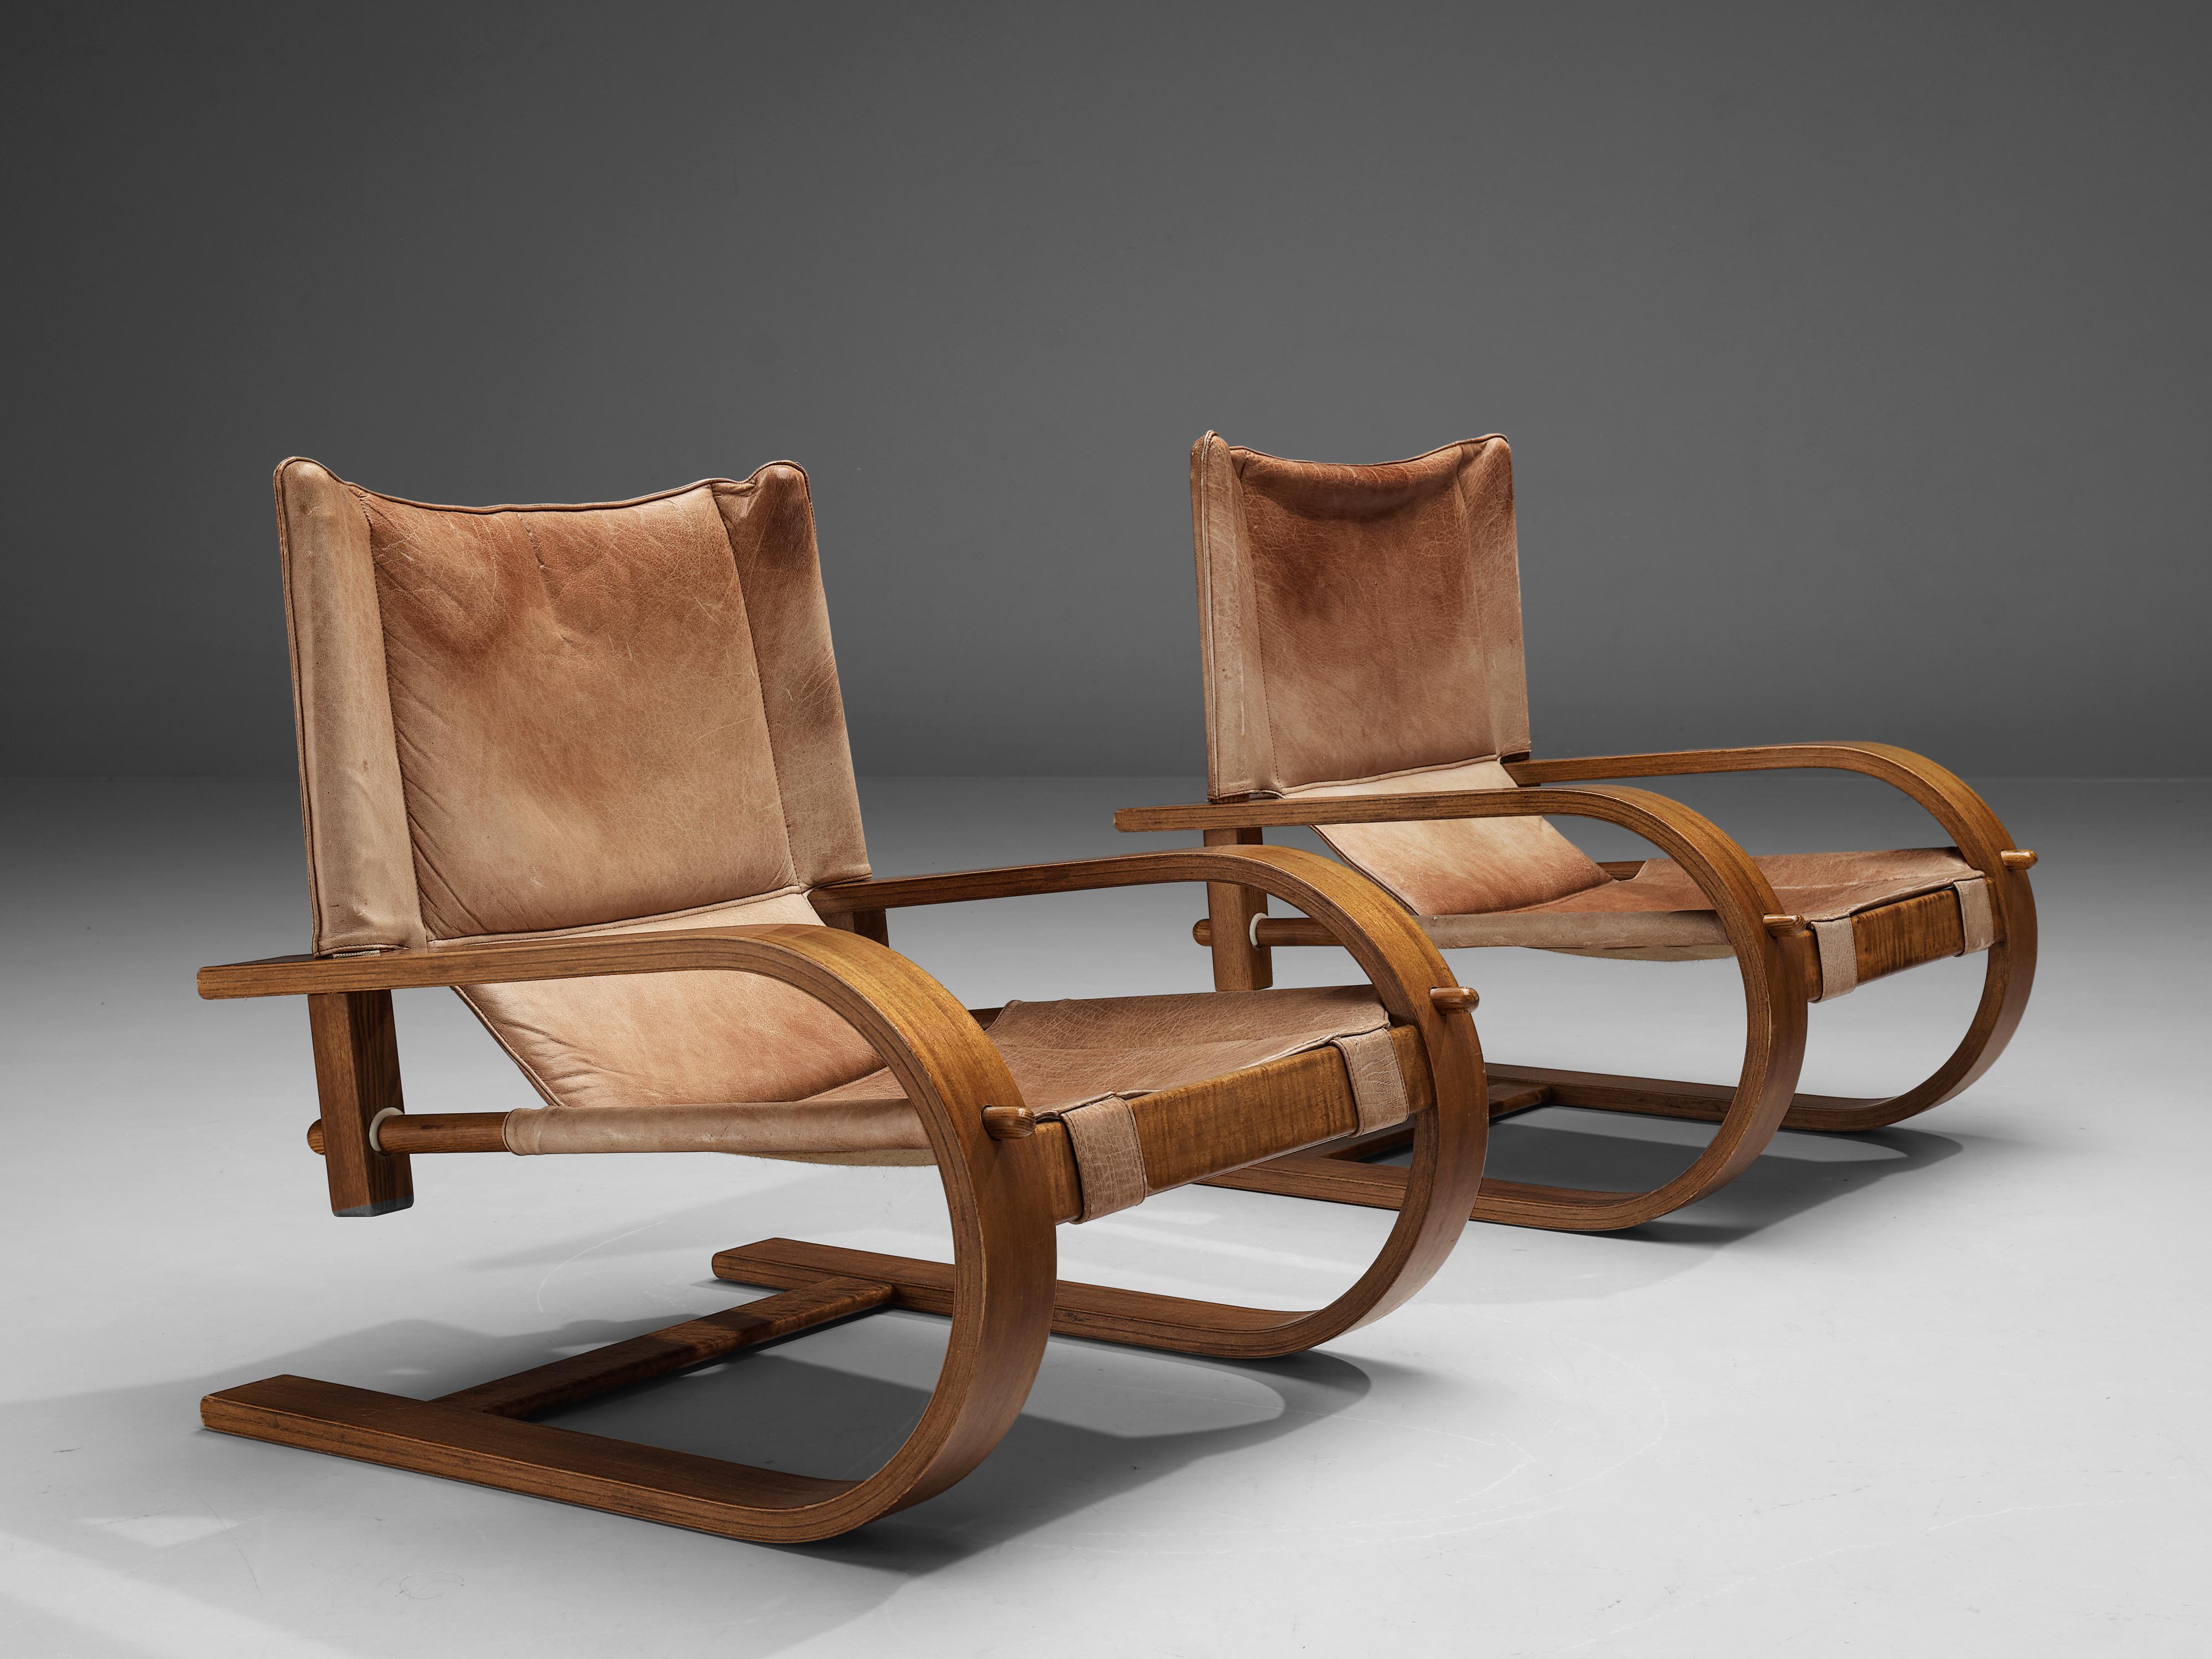 De Pas, D'Urbino and Lomazzi for Poltronova, lounge chairs model 'Scacciapensieri', leather, wood, Italy, 1960s

Cantilevered Italian lounge chairs with organically shaped frame. The frame features wonderful connective details that reveal the